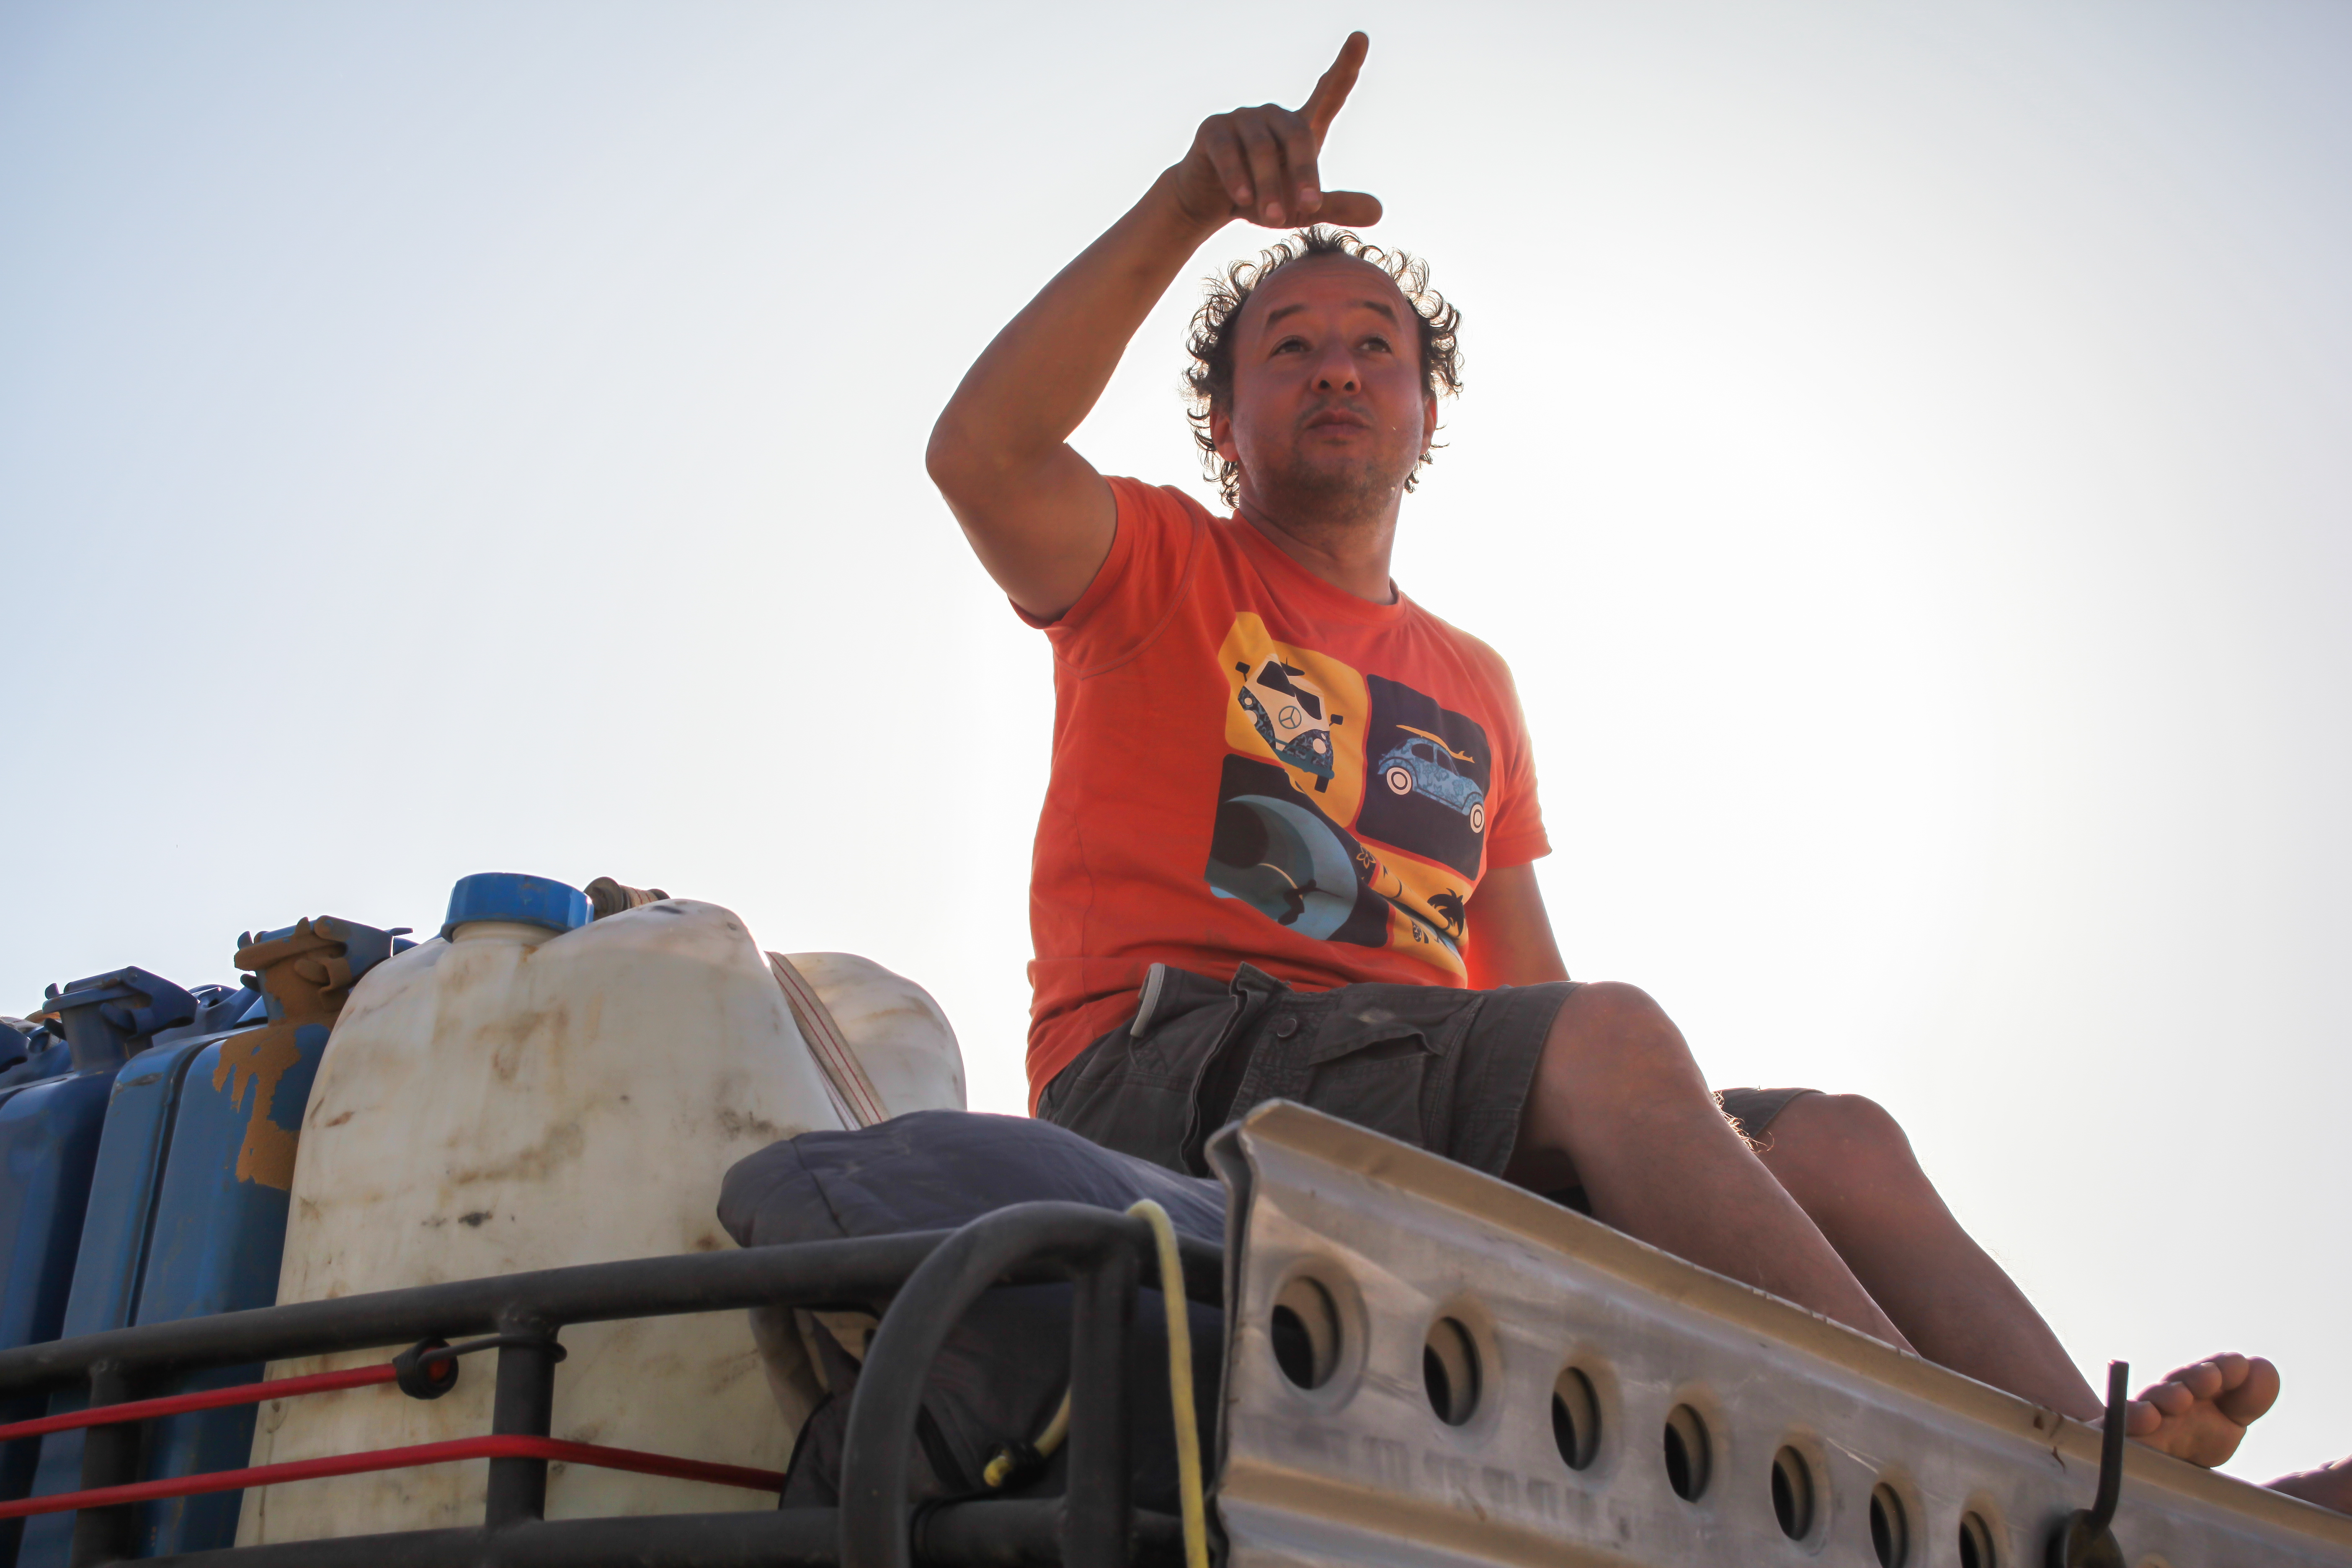 Human rights activist and director of EIPR human rights organisation Gasser Abdel Razek on a trip into the desert (photo: private)